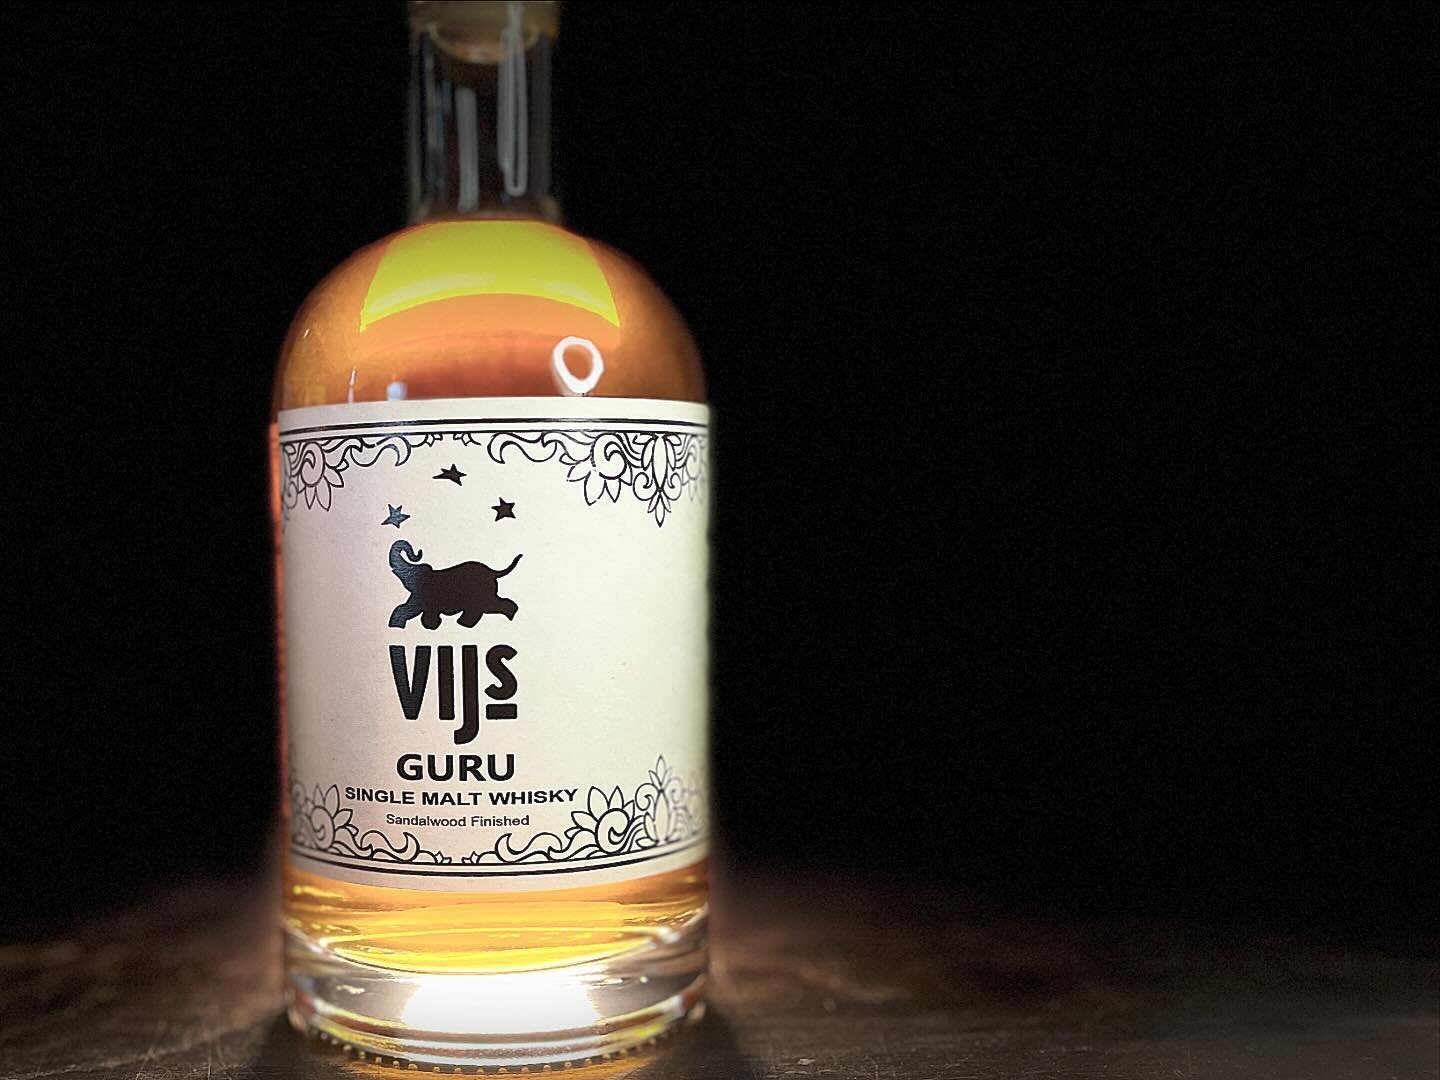 Those of you who came to see us at @bcdistilled this weekend, got a chance to try our latest collab: Vijs Guru Sandalwood Finished Canadian single malt whisky. 

Rich sweet oak on the nose, and a long aromatic finish makes for a unique, and delightfu